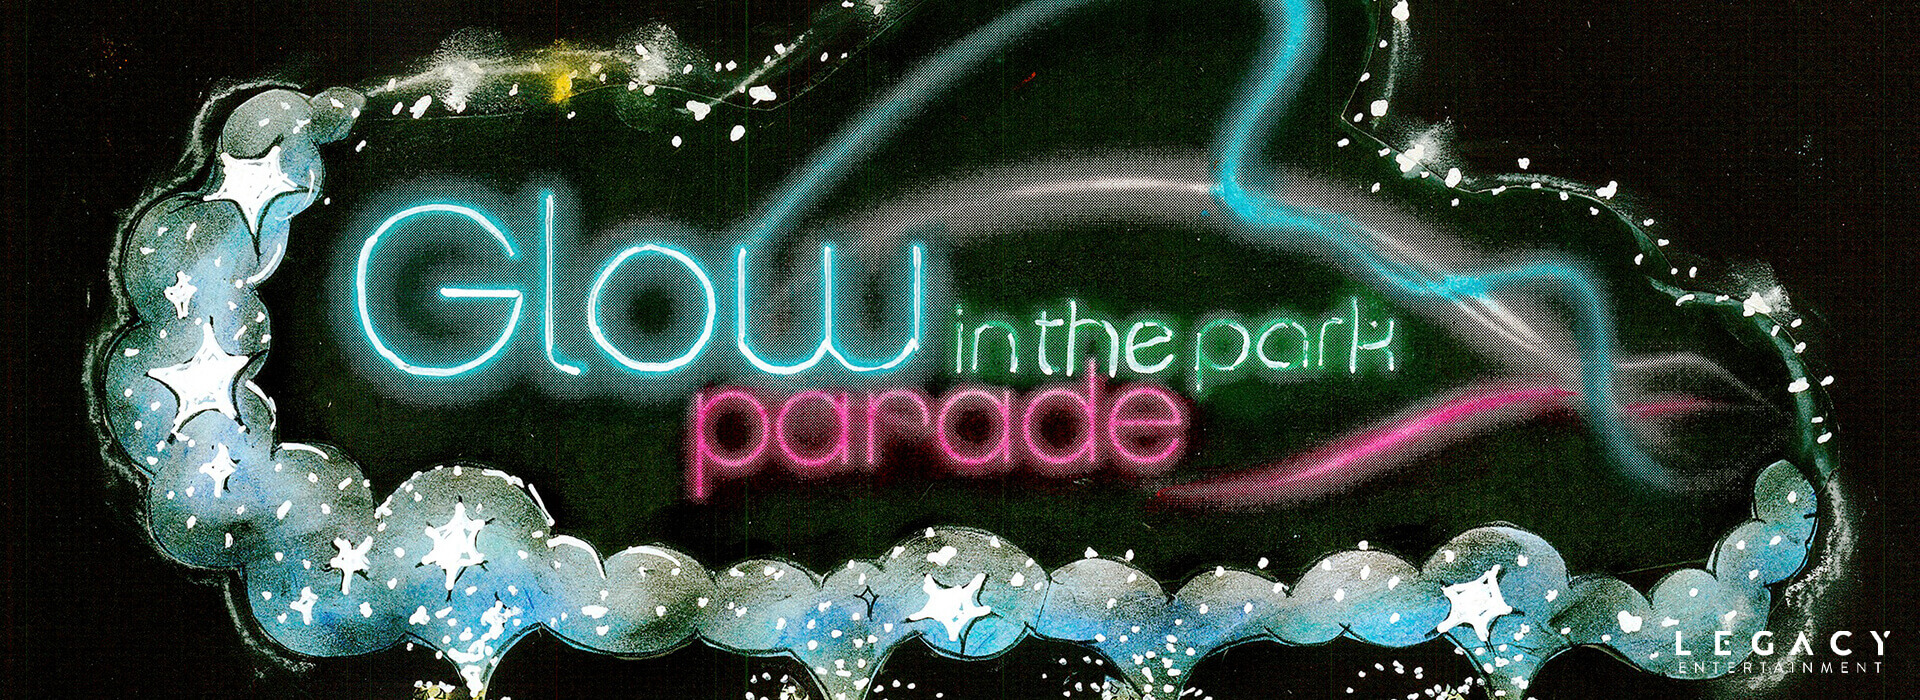 Six_Flags_Parade_Glow_in_the_Park__Parade_Design_Legacy_Entertainment_3